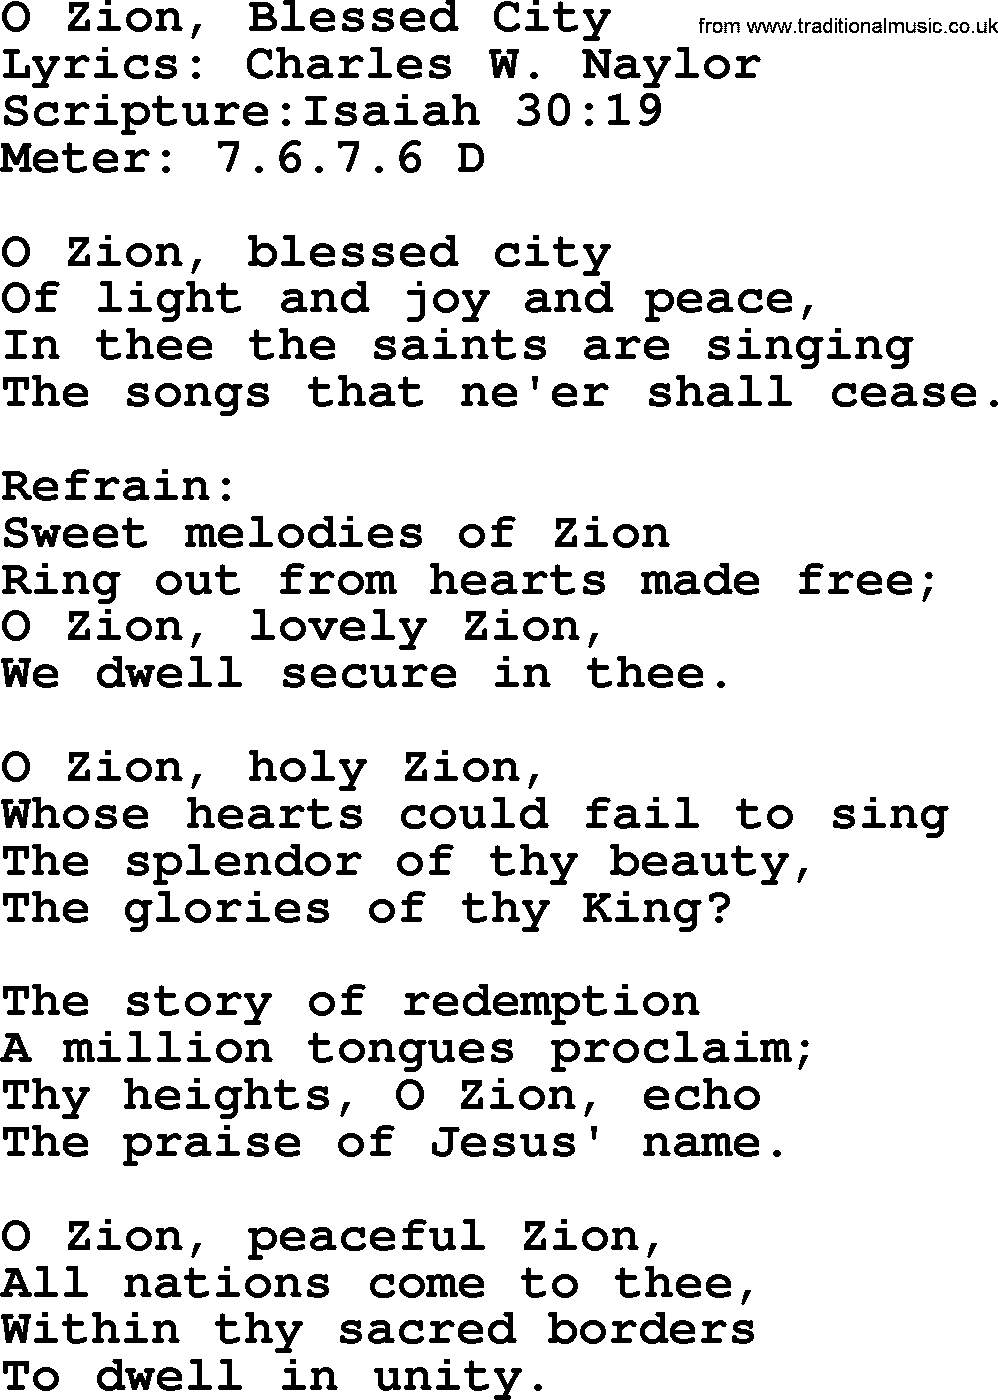 Hymns about  Angels, Hymn: O Zion, Blessed City, lyrics, sheet music, midi & Mp3 music with PDF